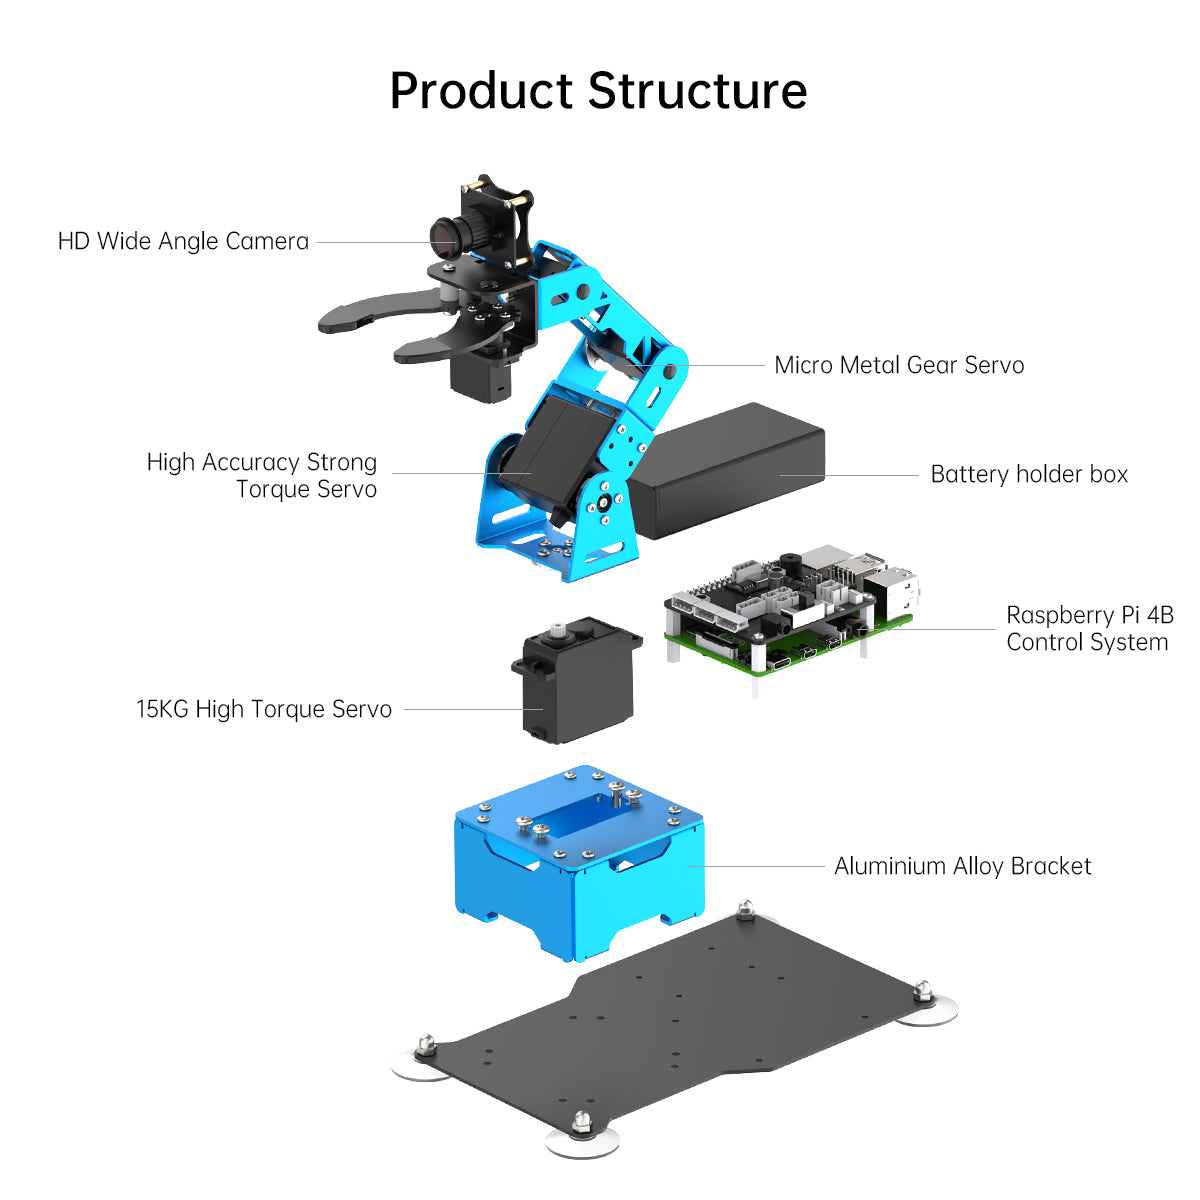 Hiwonder ArmPi mini 5DOF Vision Robotic Arm Powered by Raspberry Pi Support Python, OpenCV Target Tracking for Beginners